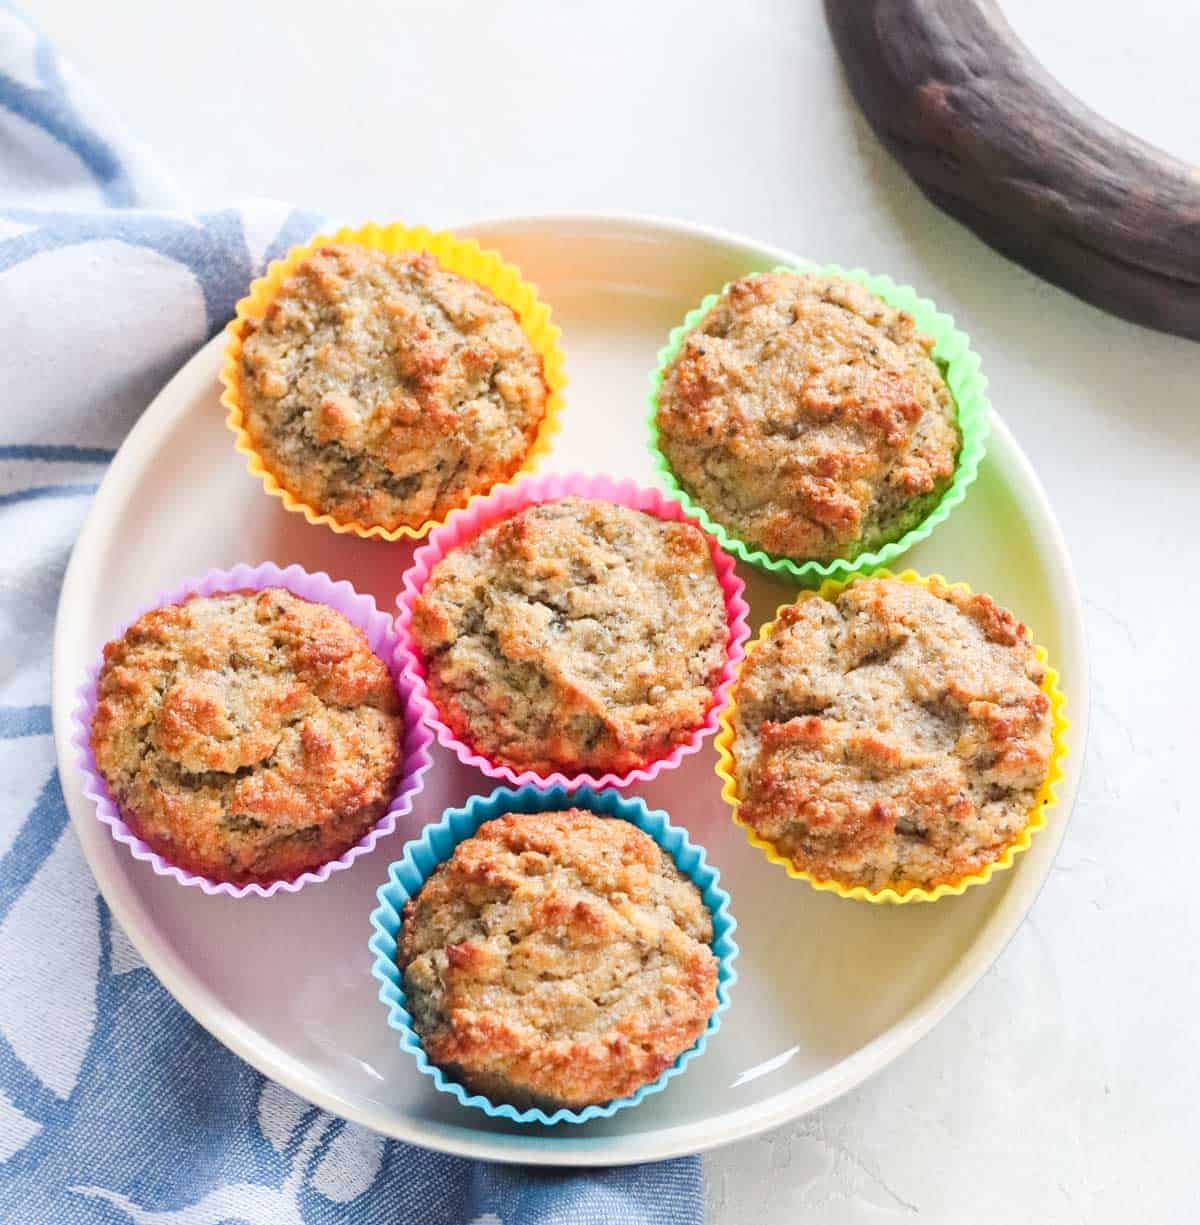 six muffins in colorful silicone muffin liners on a beige plate next to an old banana and blue napkin